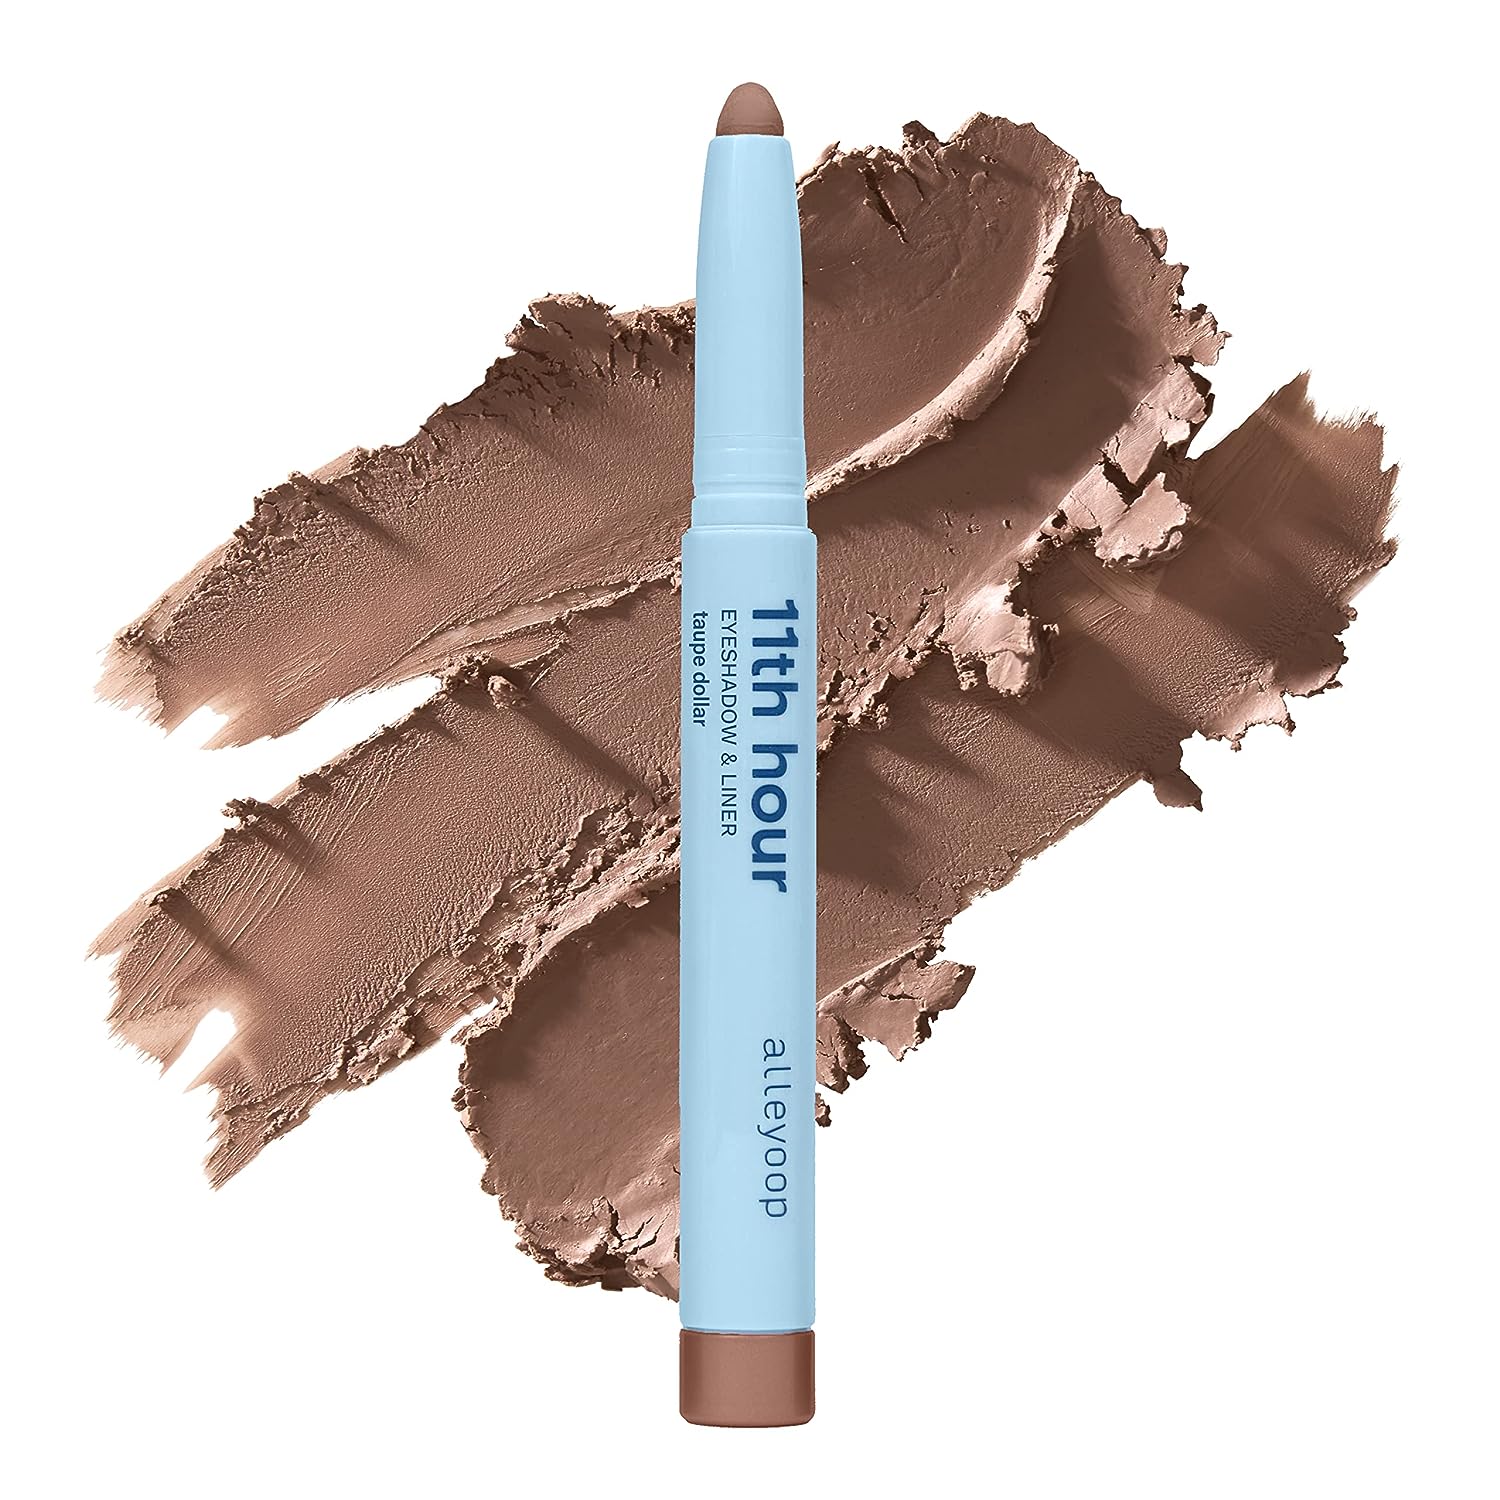 ALLEYOOP 11th Hour Cream Eye Shadow Sticks - Taupe Dollar (Matte) - Award-winning Eyeshadow Stick - Smudge-Proof and Crease Proof for Over 11 Hours - Easy-To-Apply and Compact for Travel, 0.05